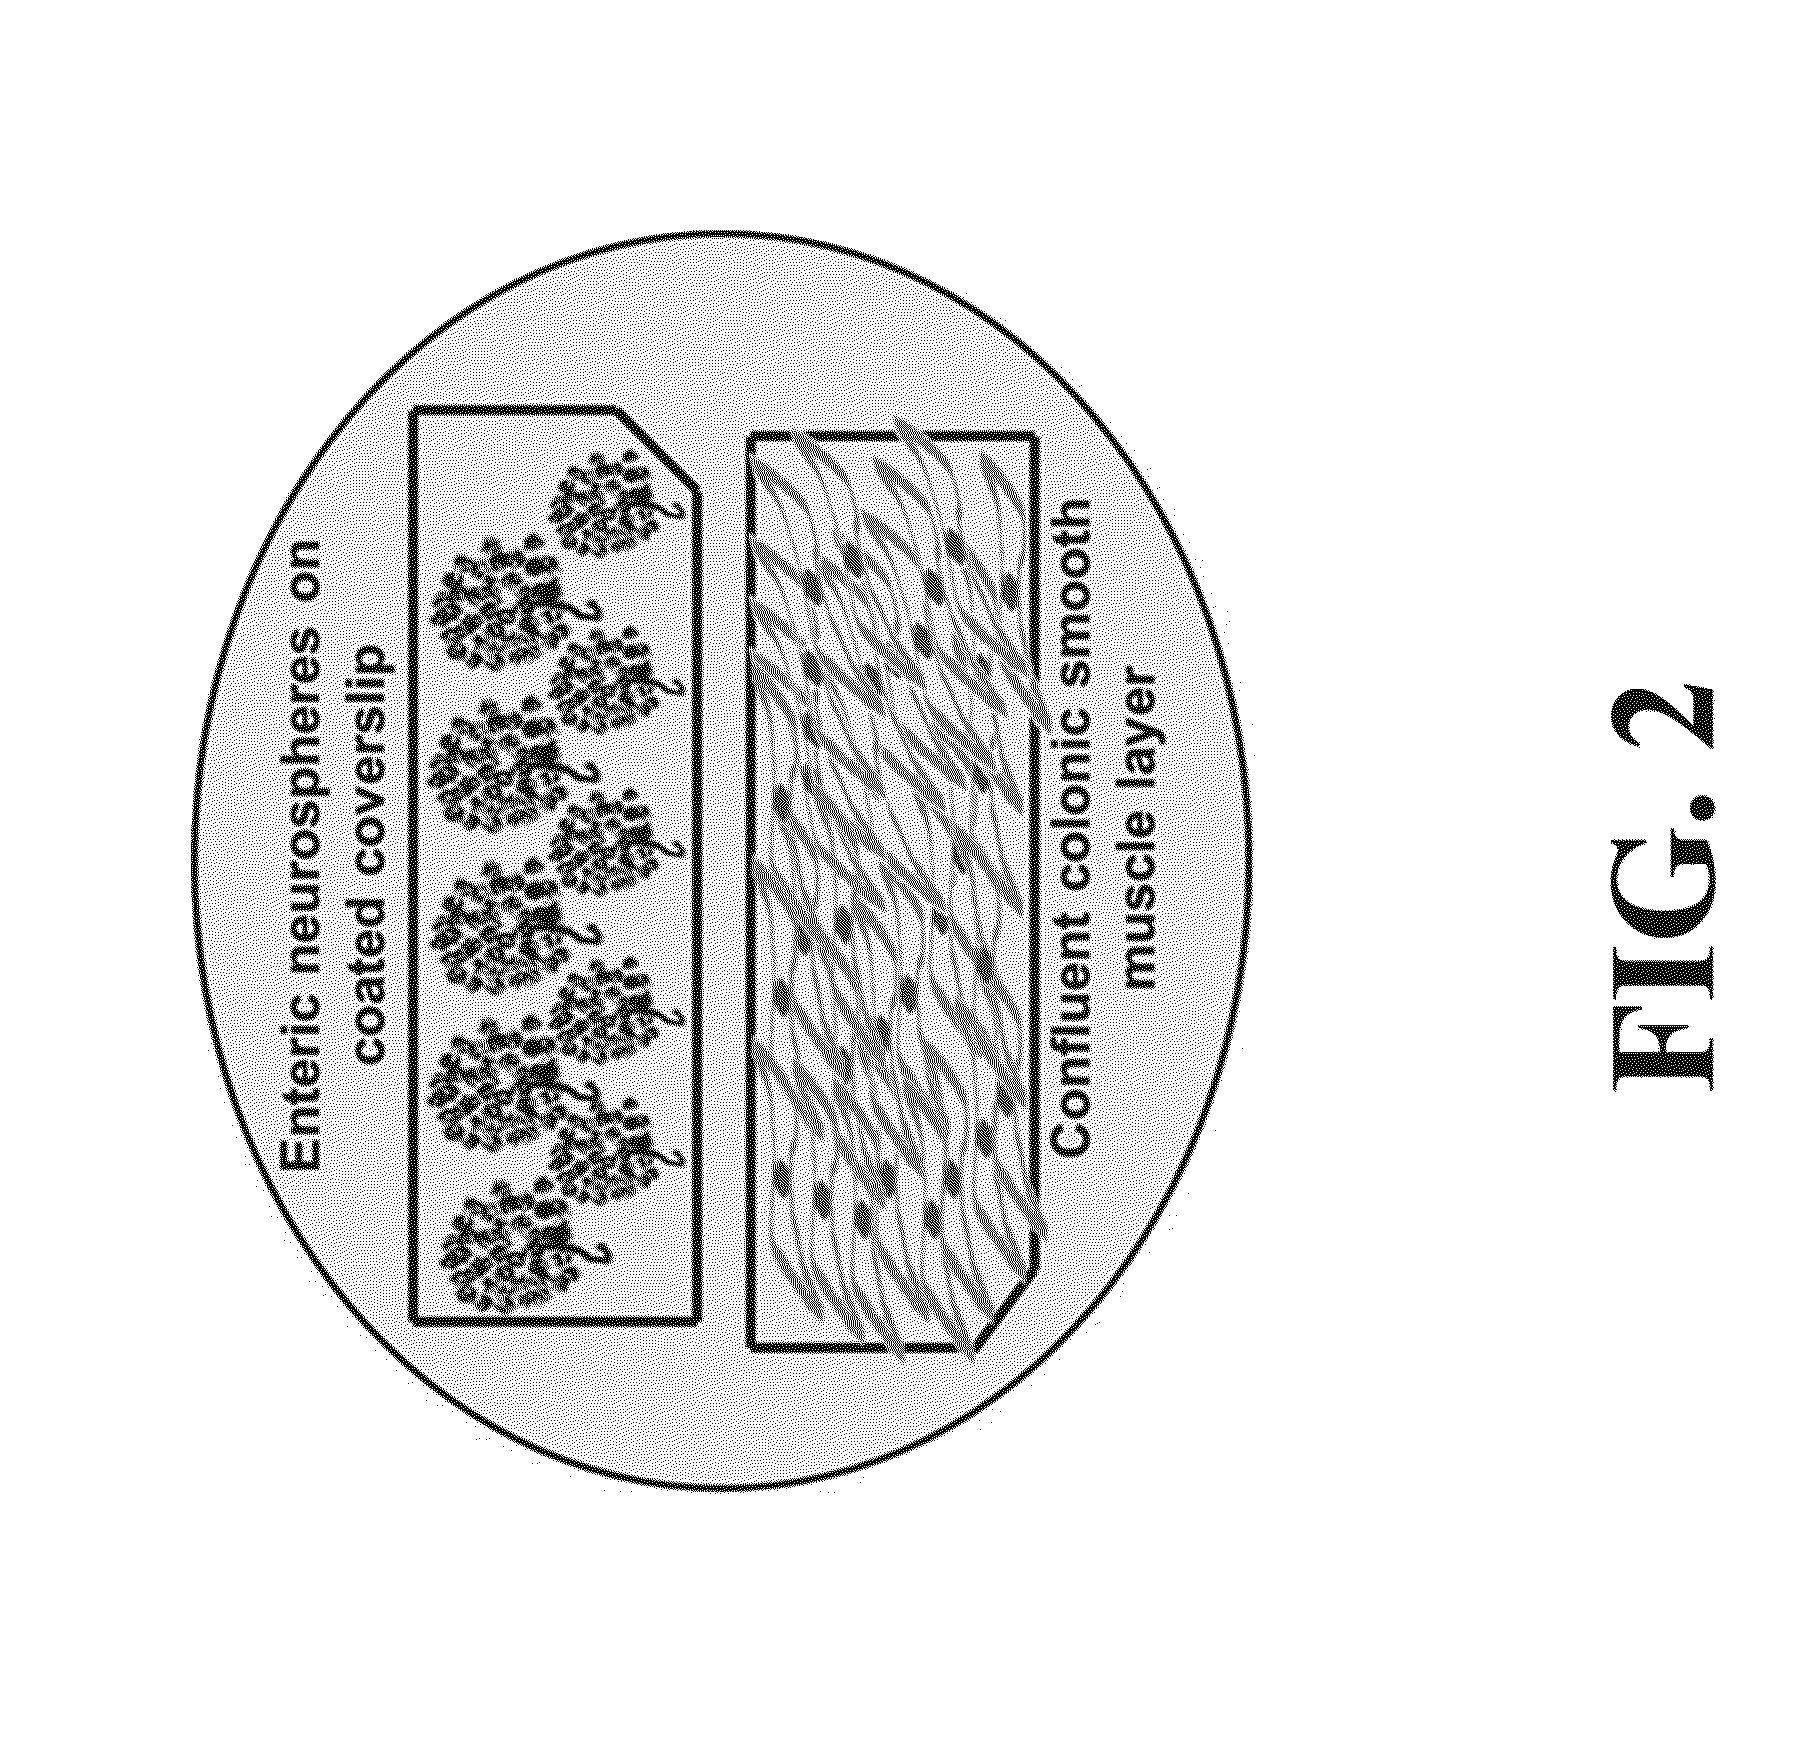 Neural Progenitor Cell Differentiation